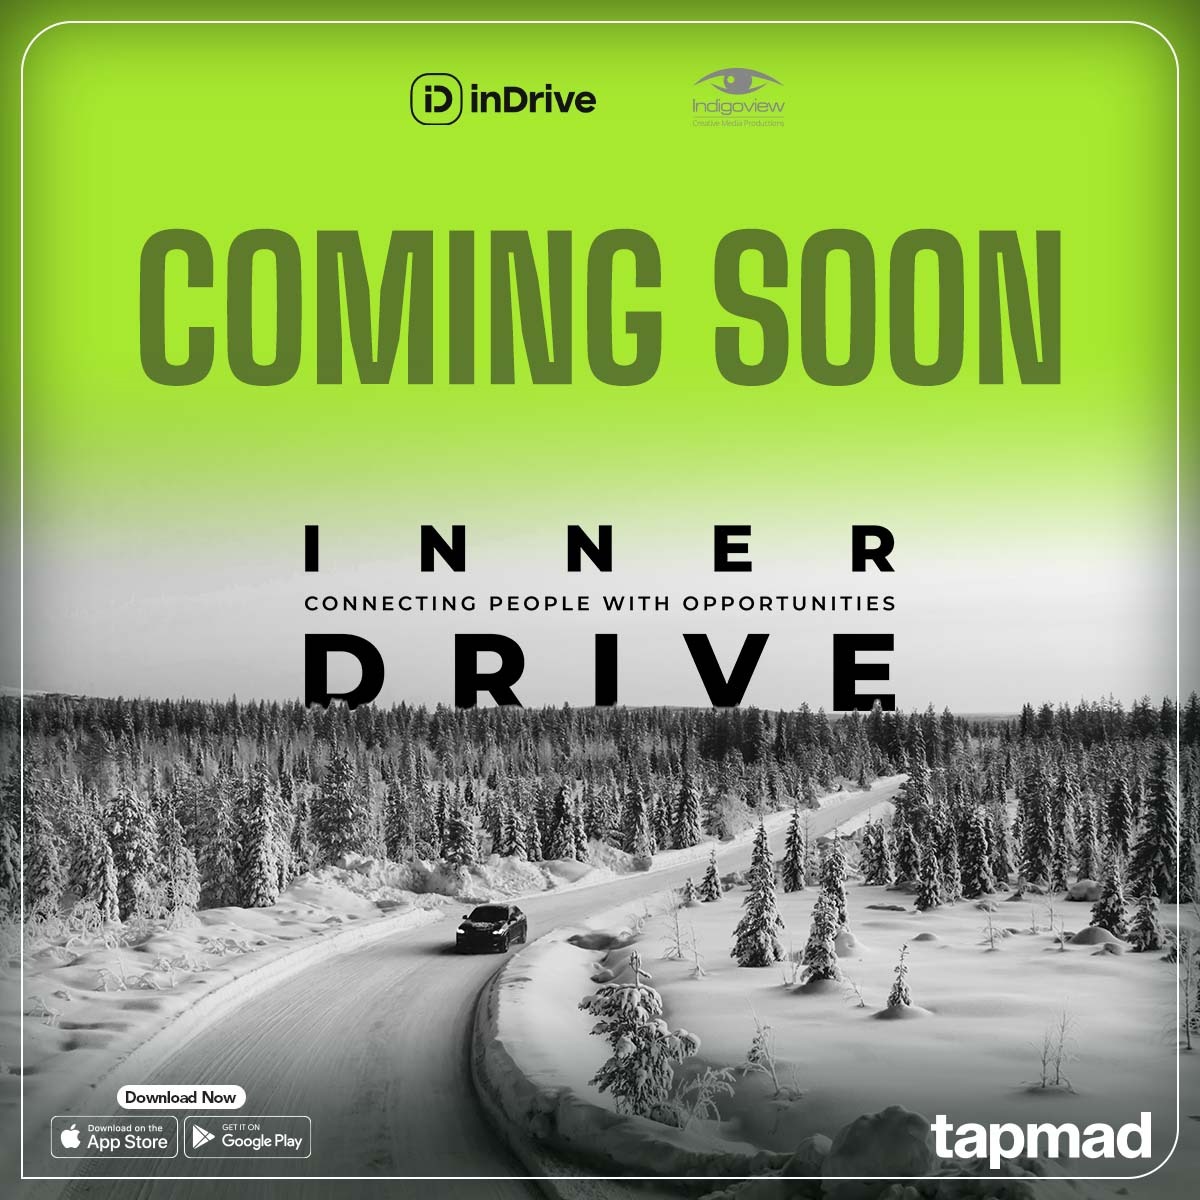 Ready to be blown away? 🌟 Join inDrive on their mission to challenge injustice and ignite change. Tap now for a glimpse of the Inner Drive documentary – coming soon to inspire and empower!! 🚀🎥  

#DriveChange | #inDrive | #tapmad | #InnerDrive| #ComingSoon